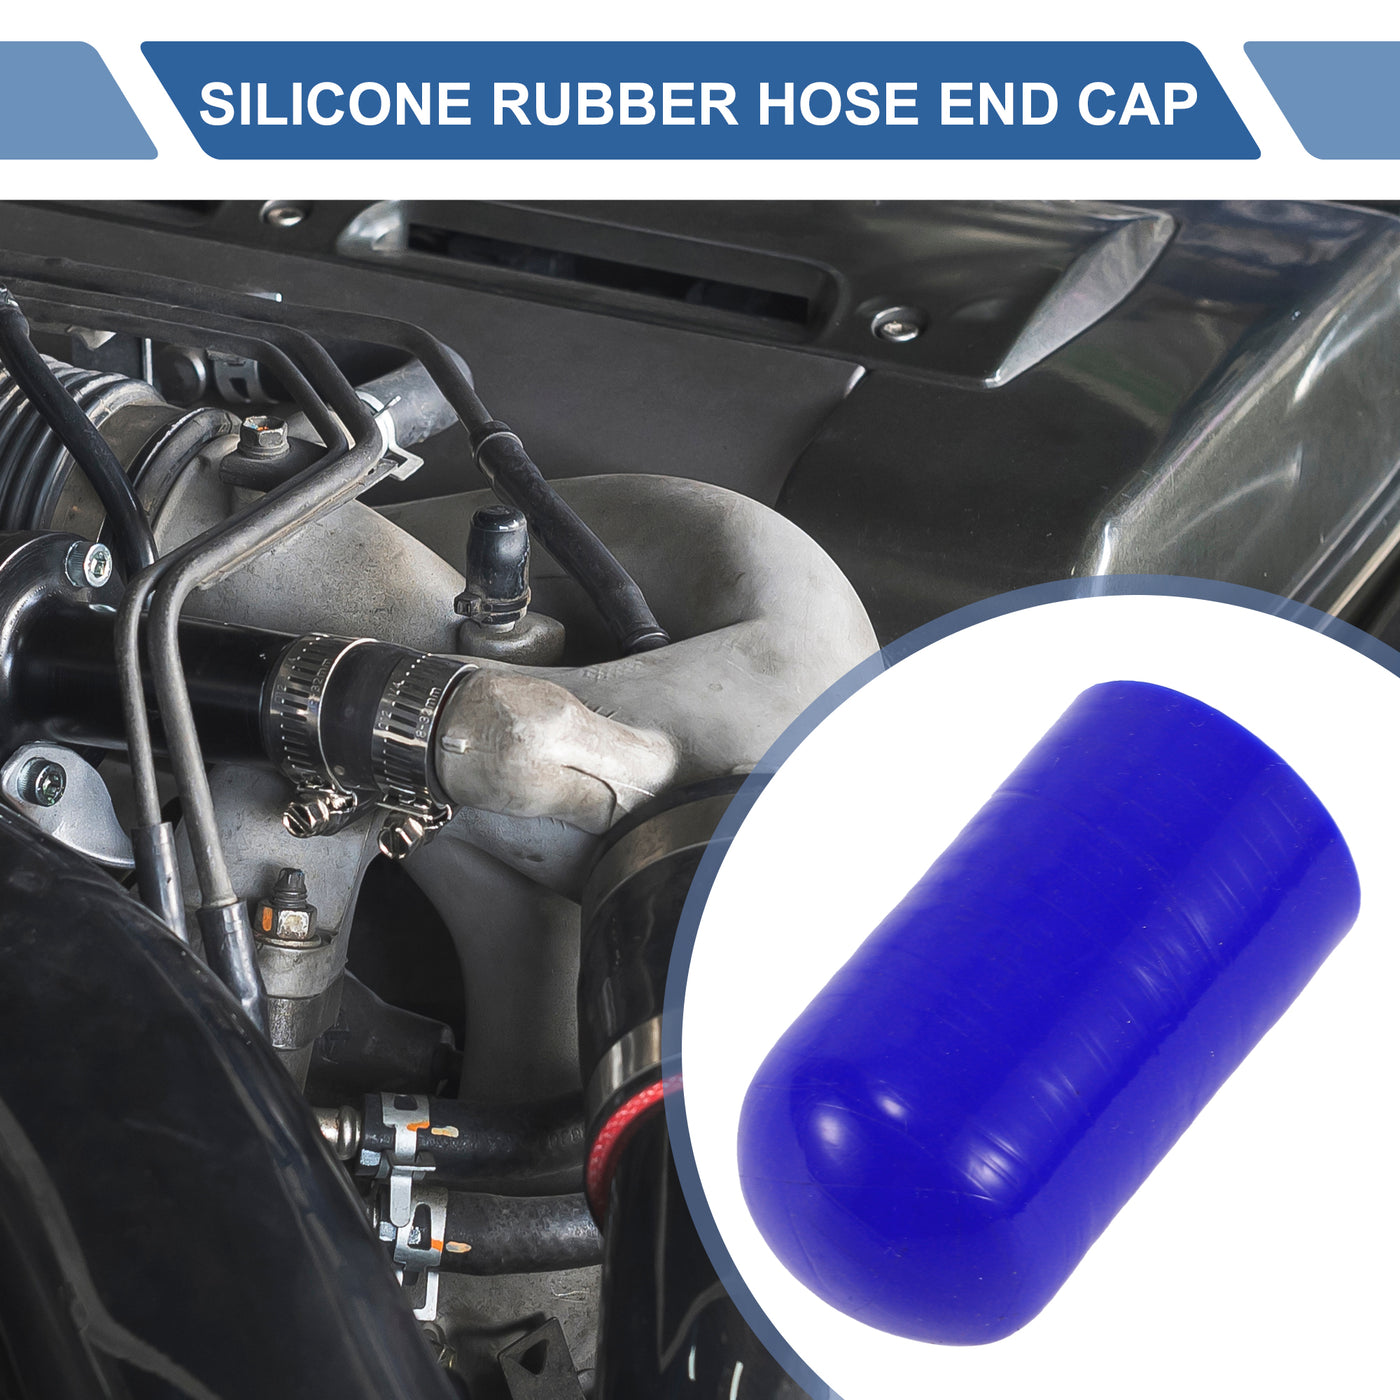 X AUTOHAUX 1 Pcs 60mm Length 32mm/1.26" ID Blue Car Silicone Rubber Hose End Cap with Clamp Silicone Reinforced Blanking Cap for Bypass Tube Universal